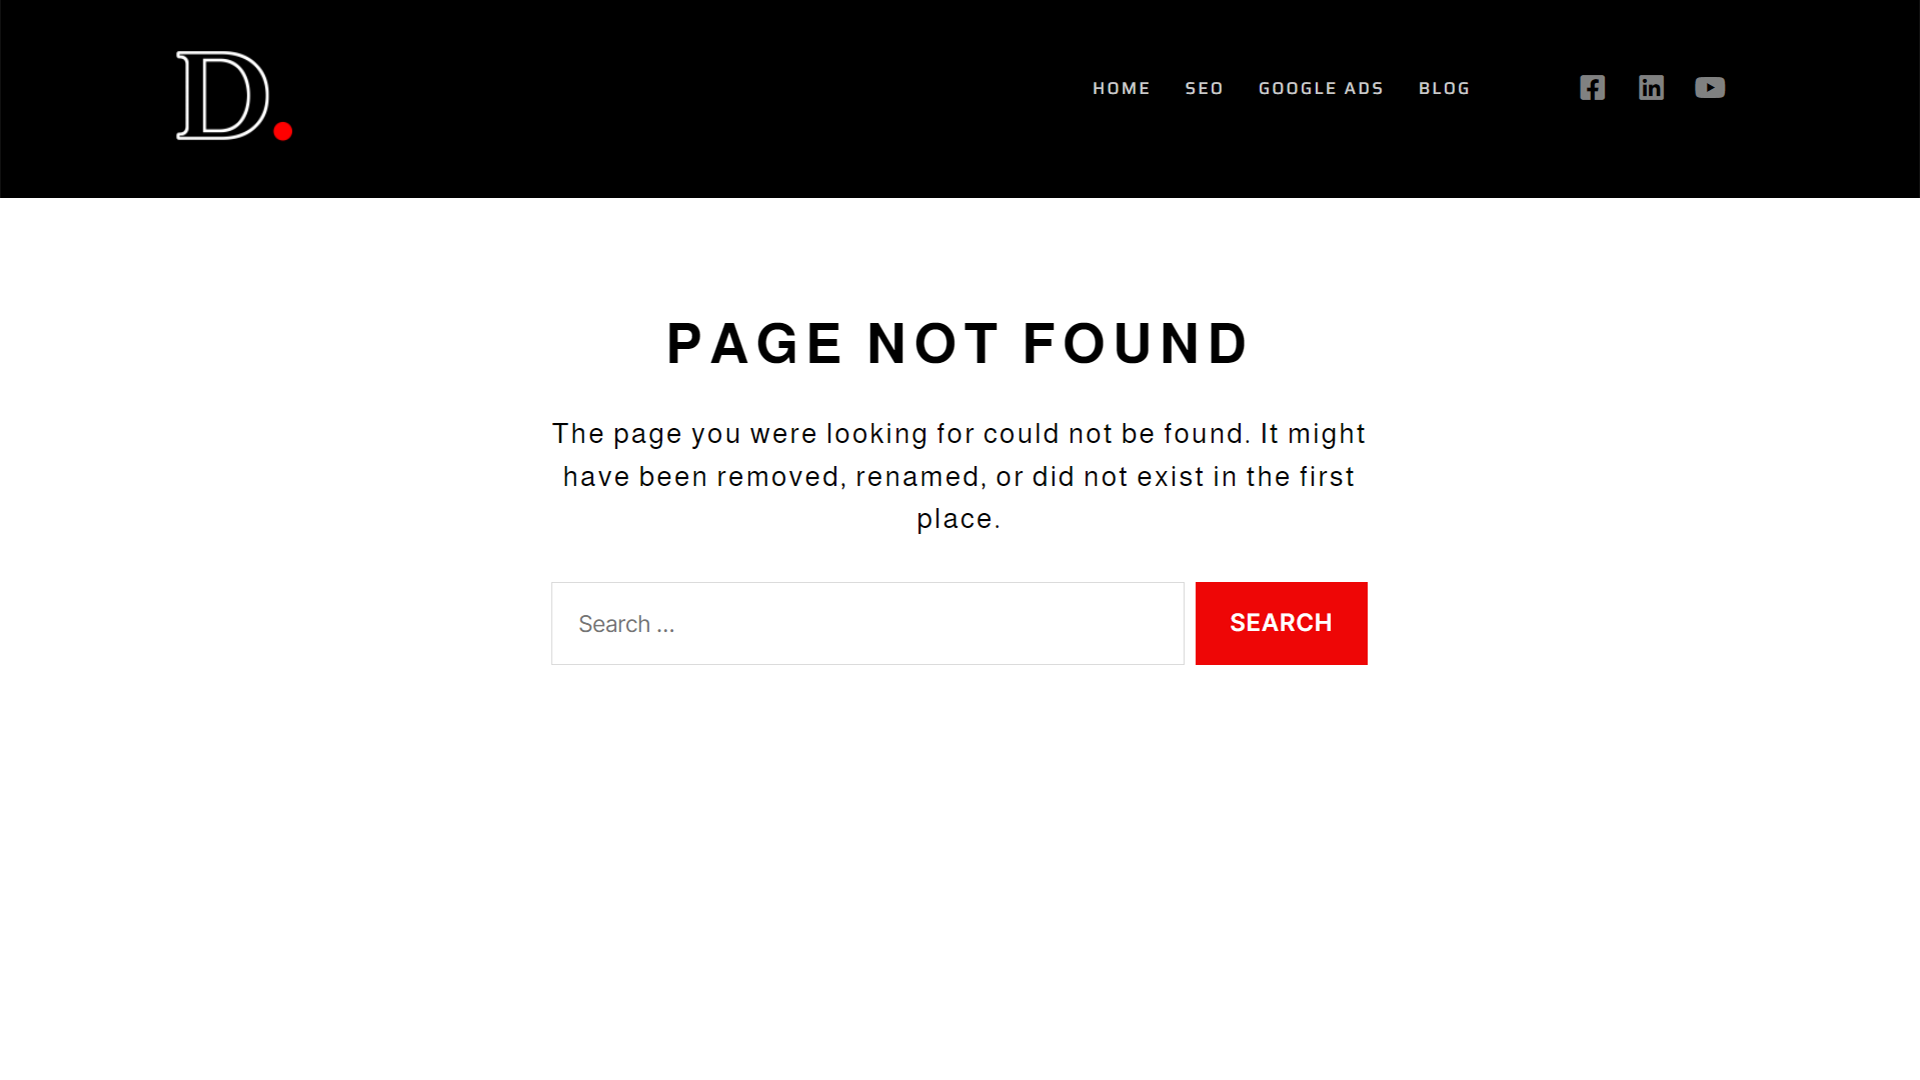 What a 404 Page Looks Like